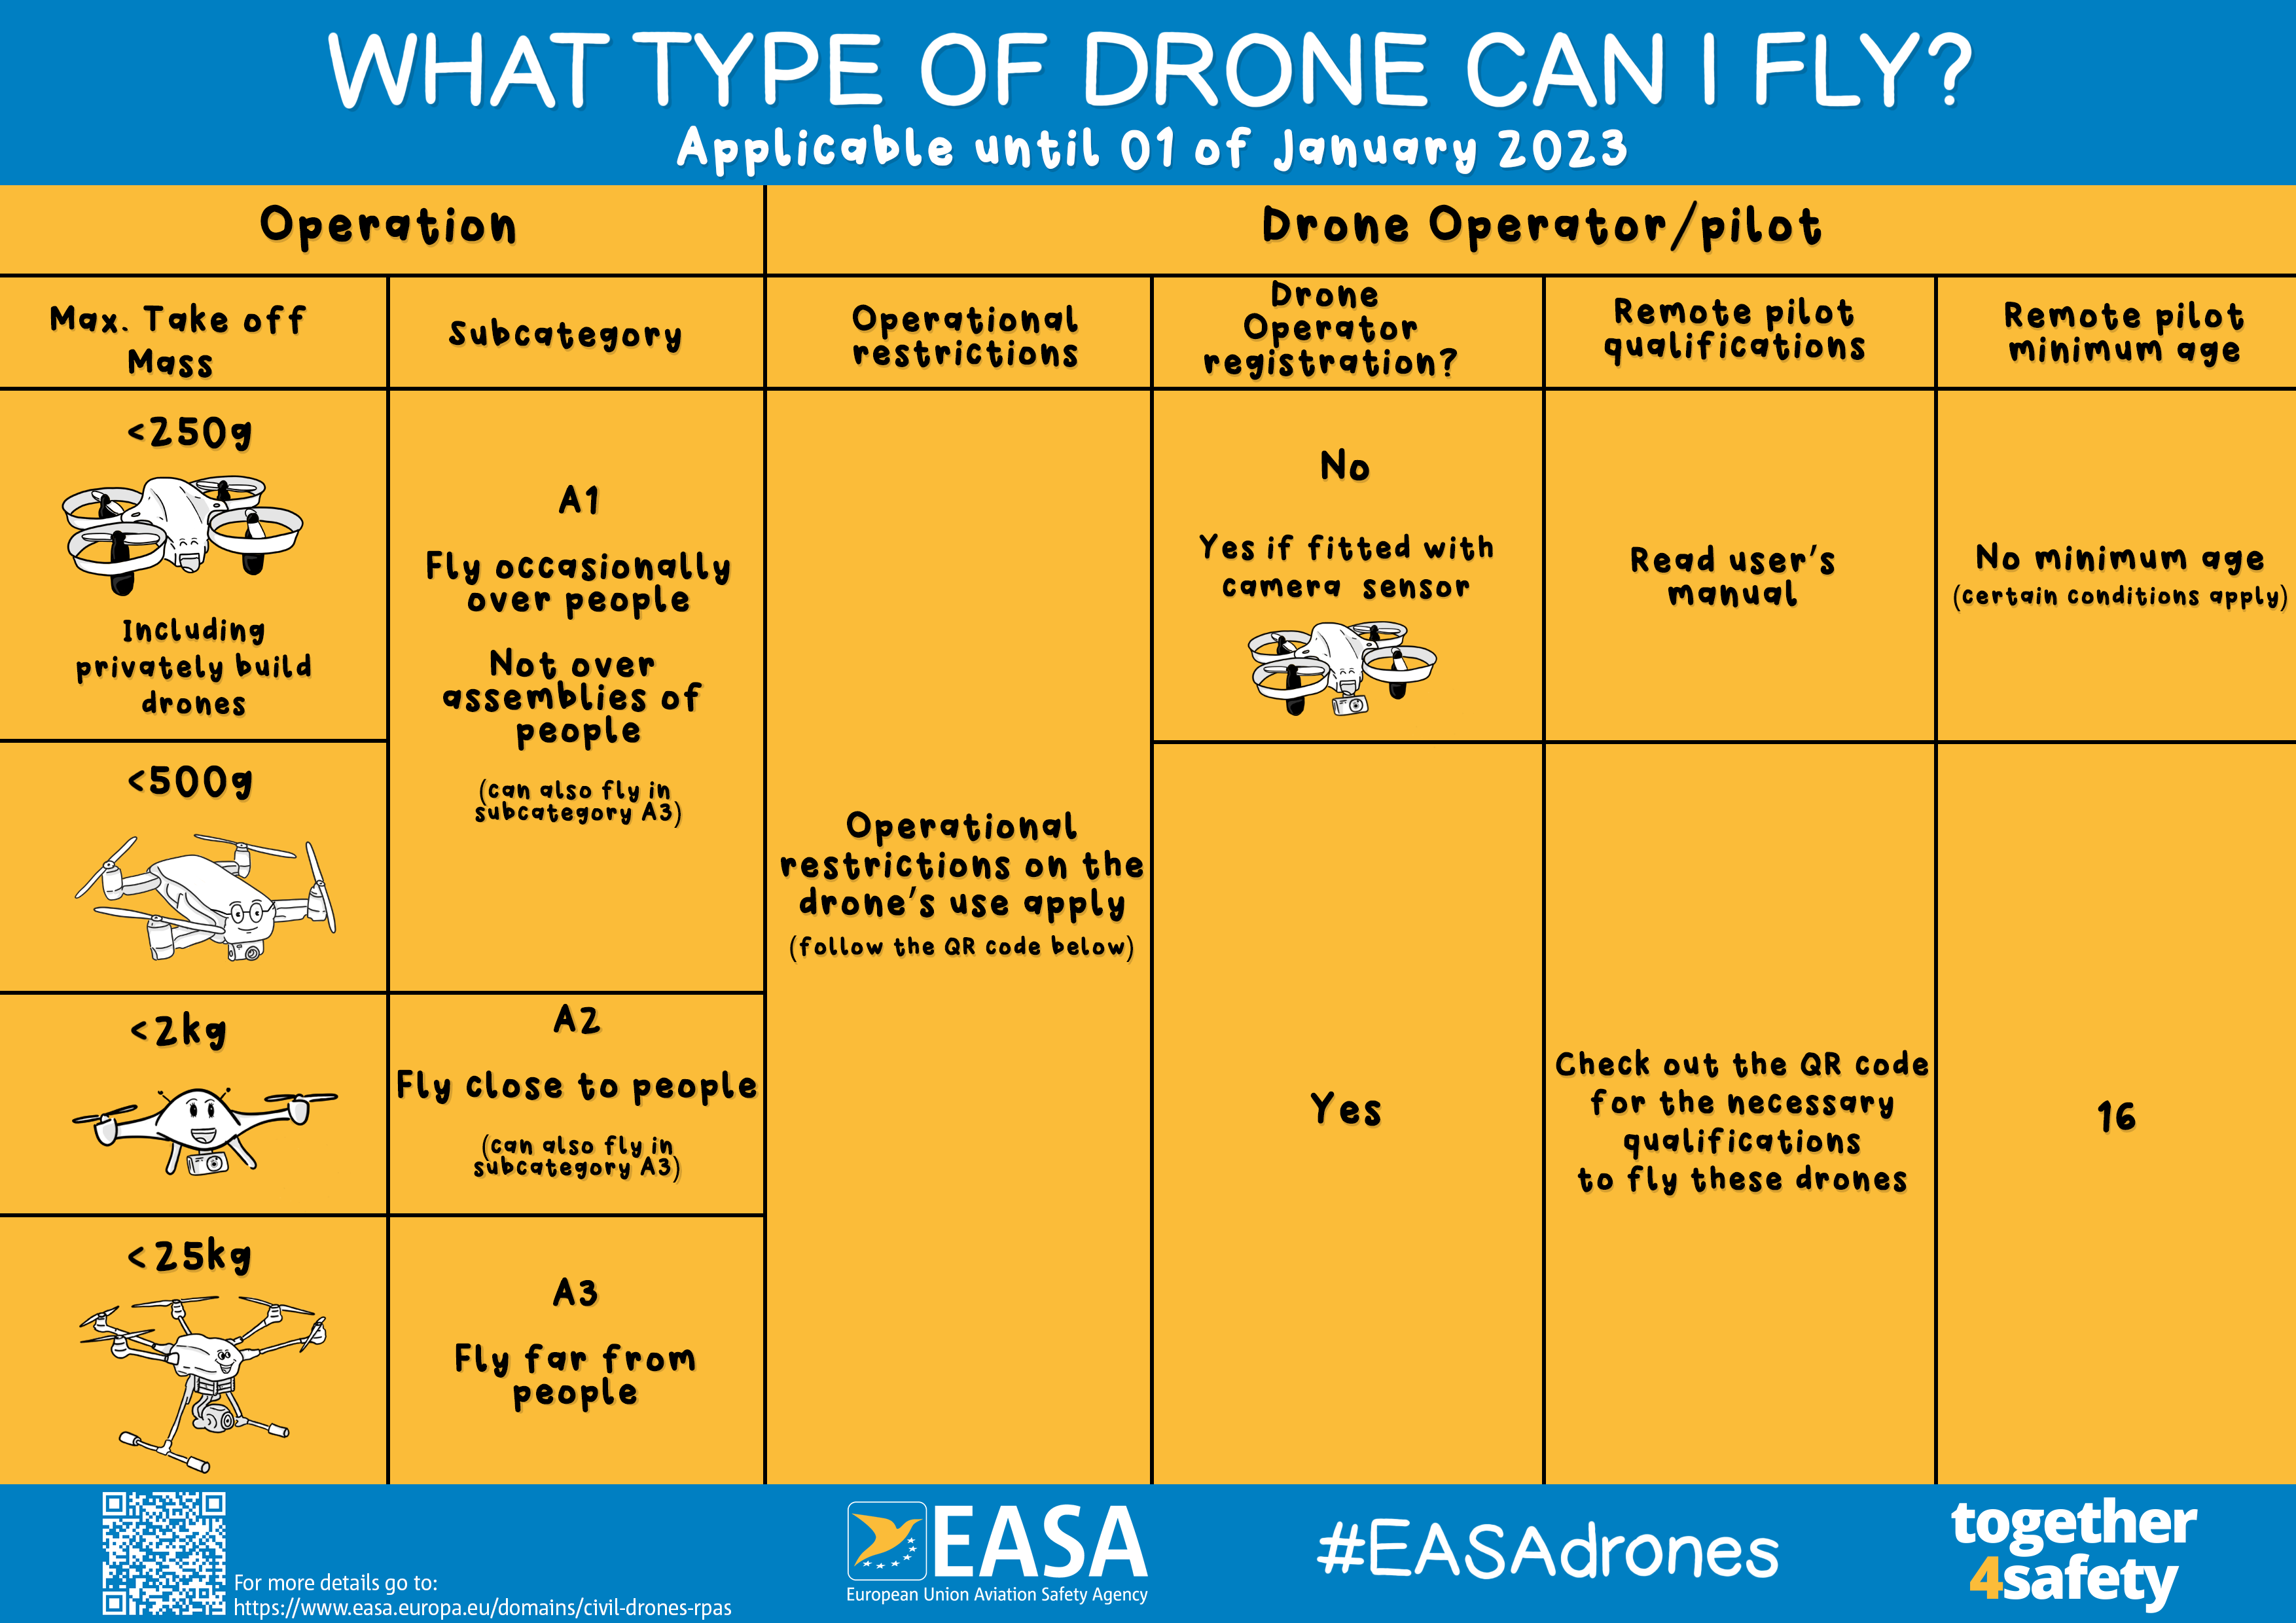 What kind of drone can I fly?